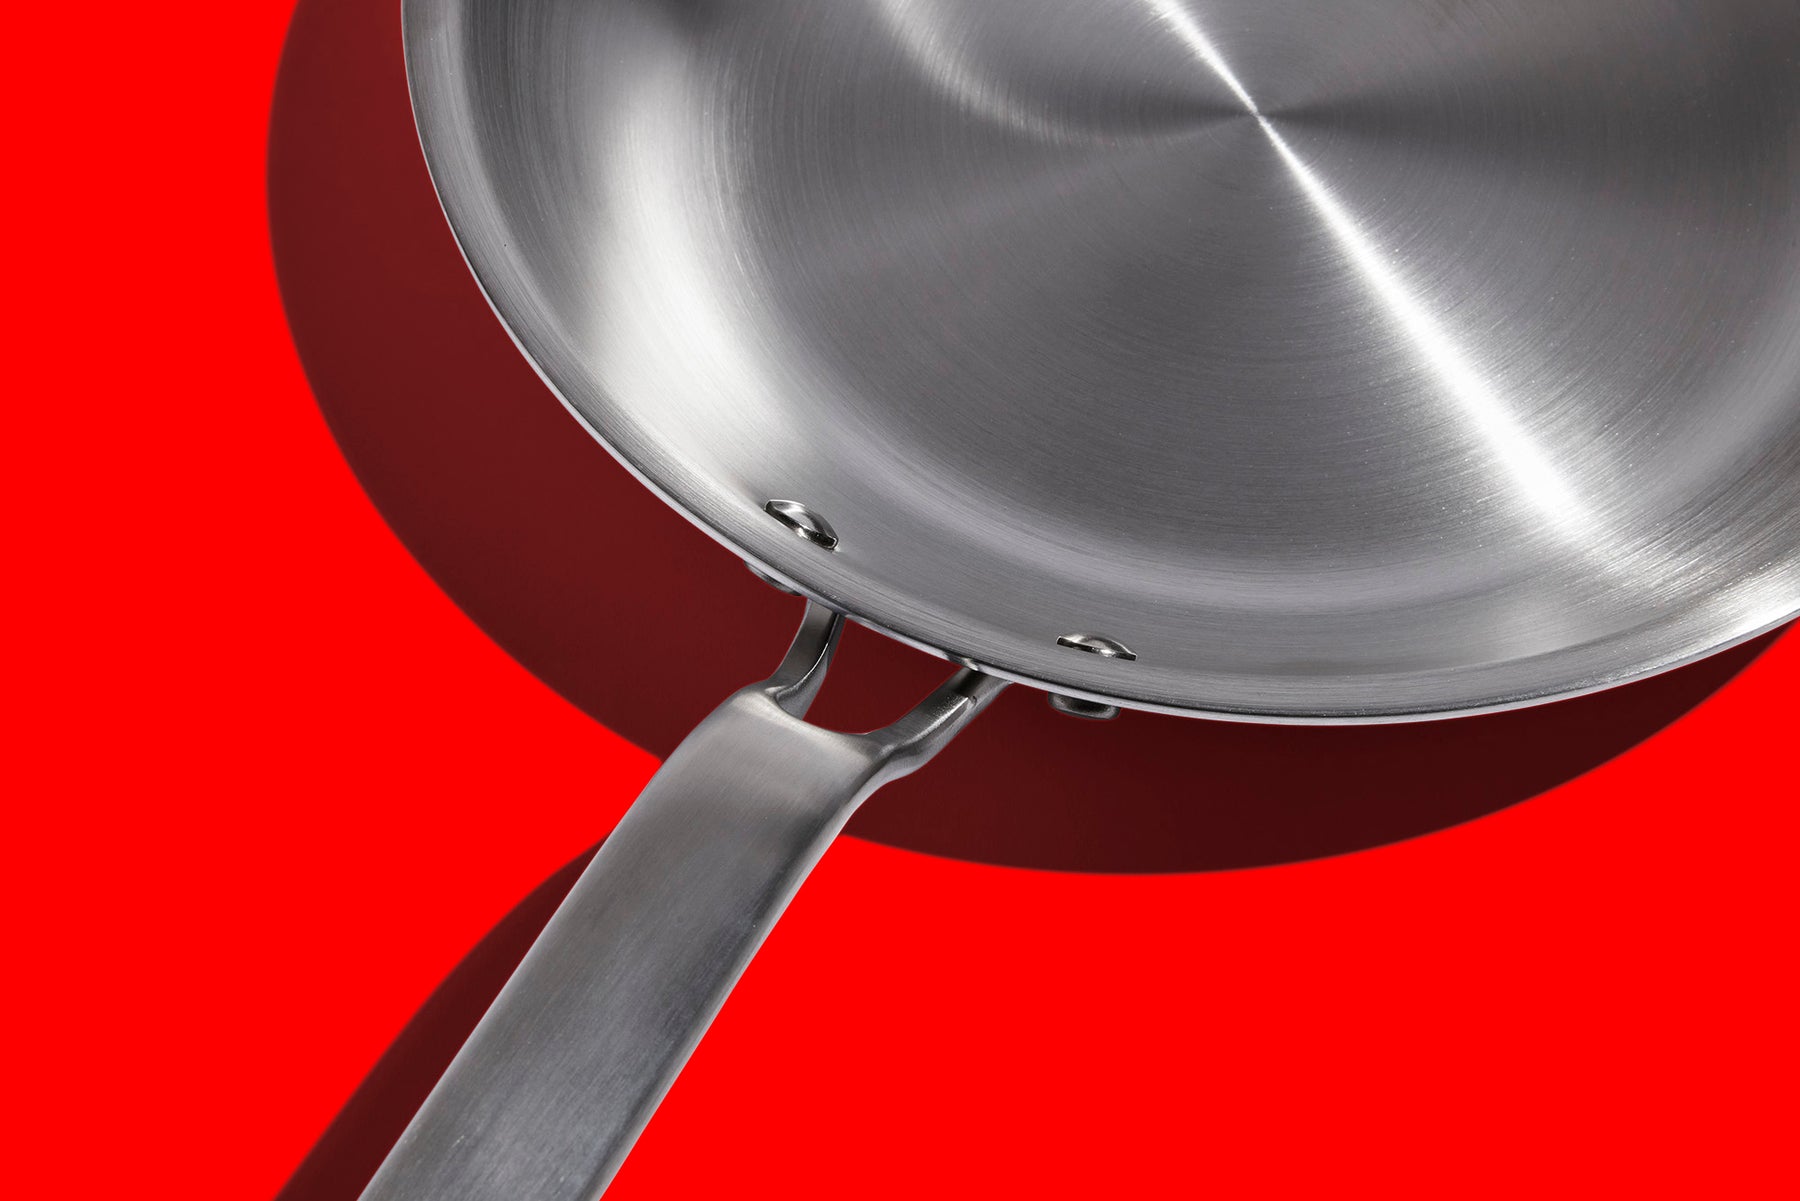 How to Shop For a Stainless Steel Pan - Made In